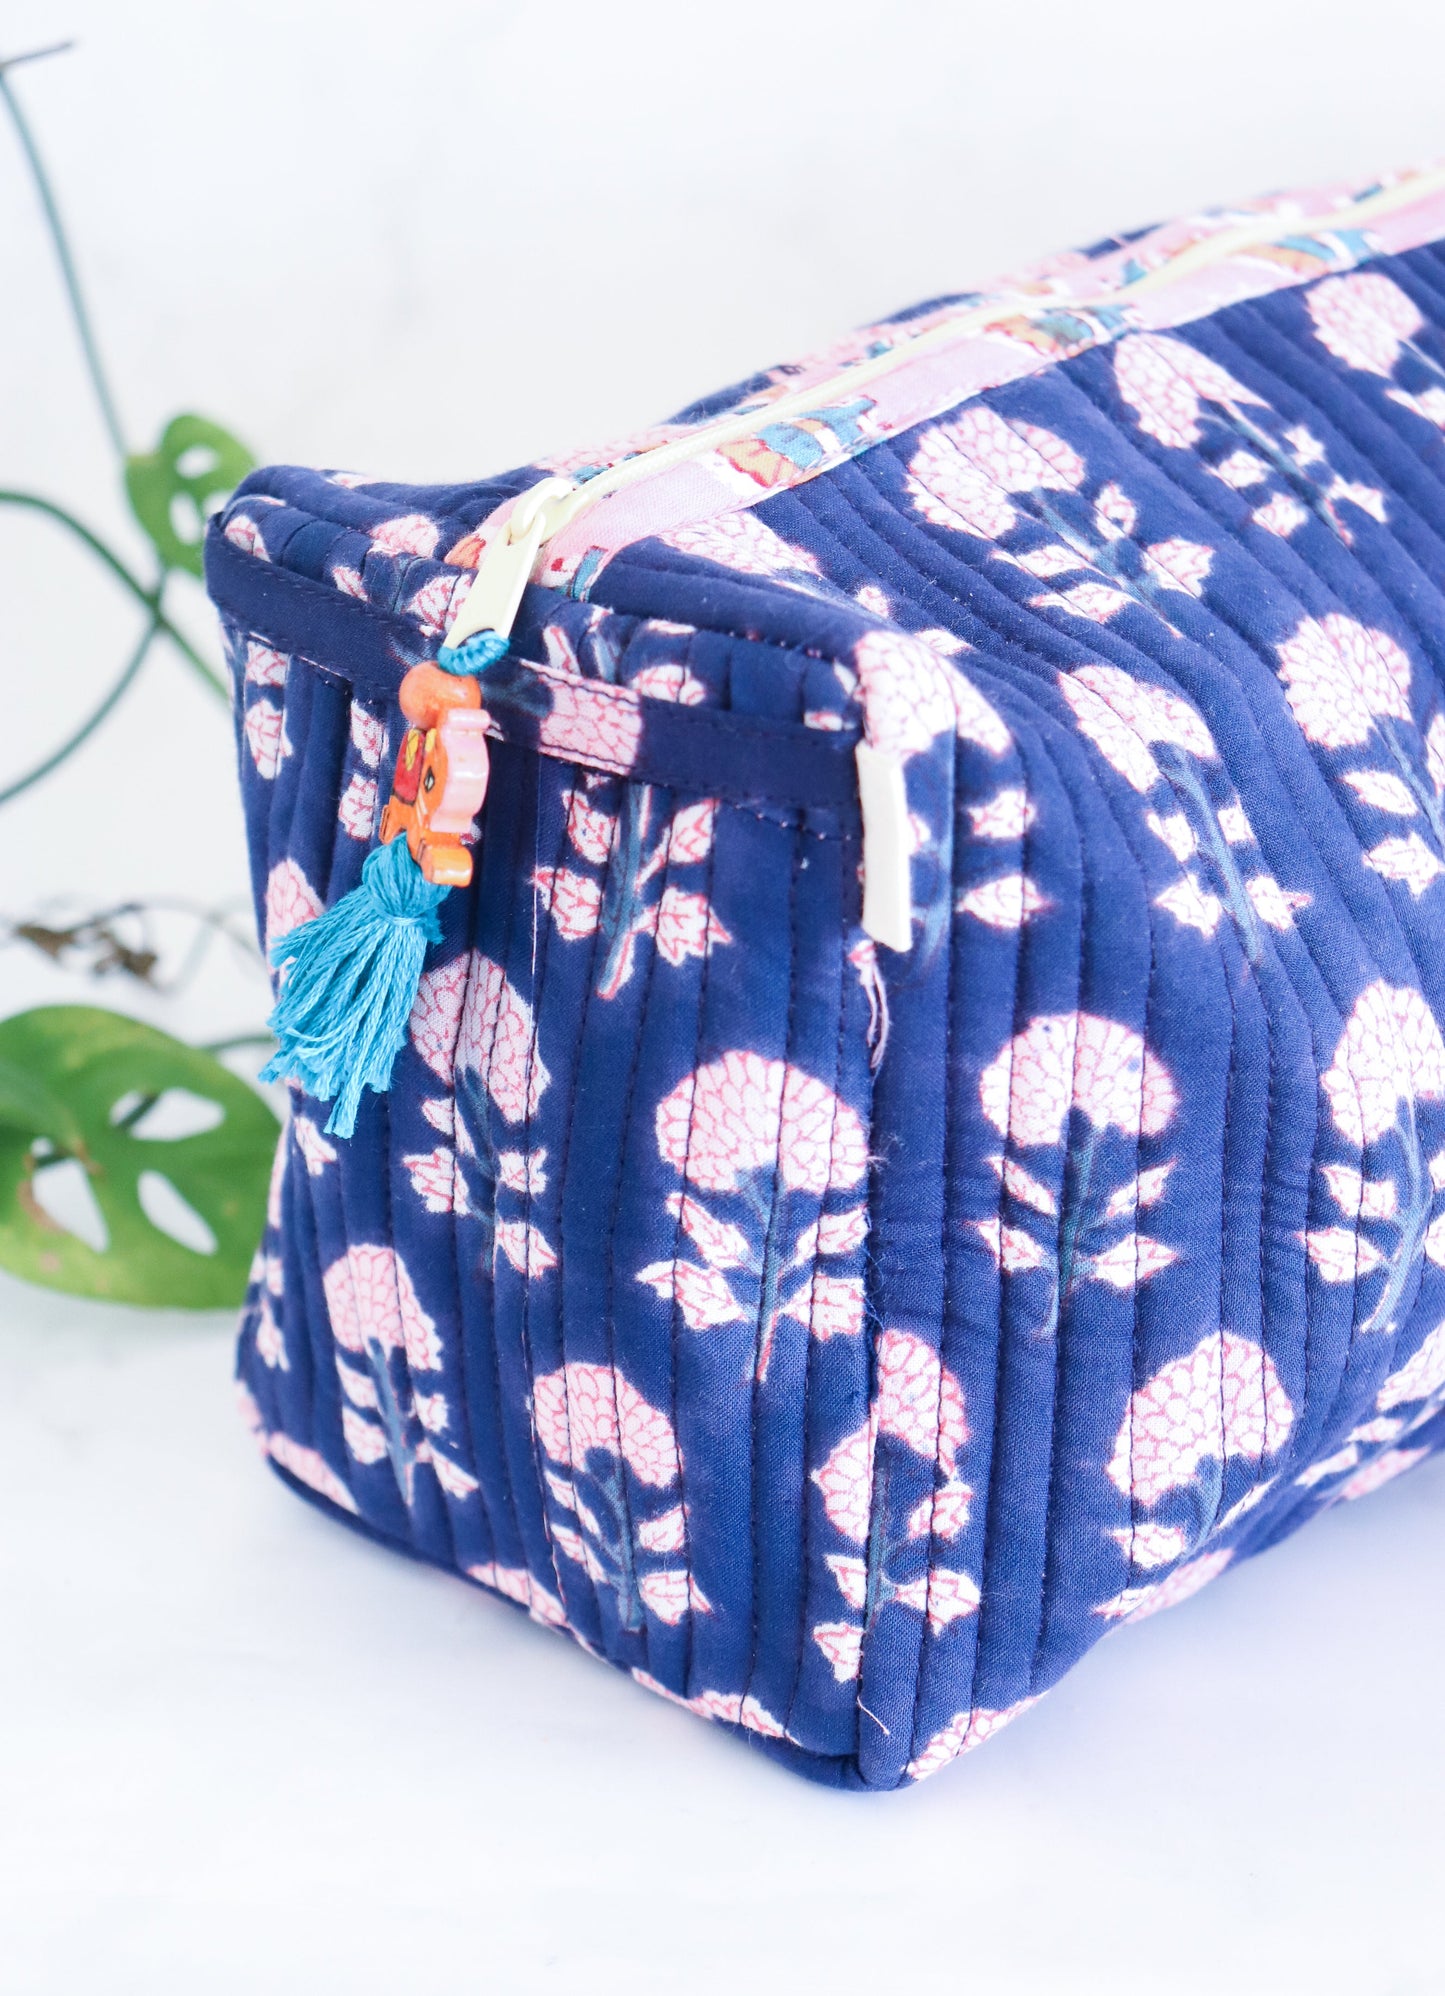 Large Cosmetic bag - Makeup bag - Block print fabric travel pouch- Dark blue cosmetic pouch